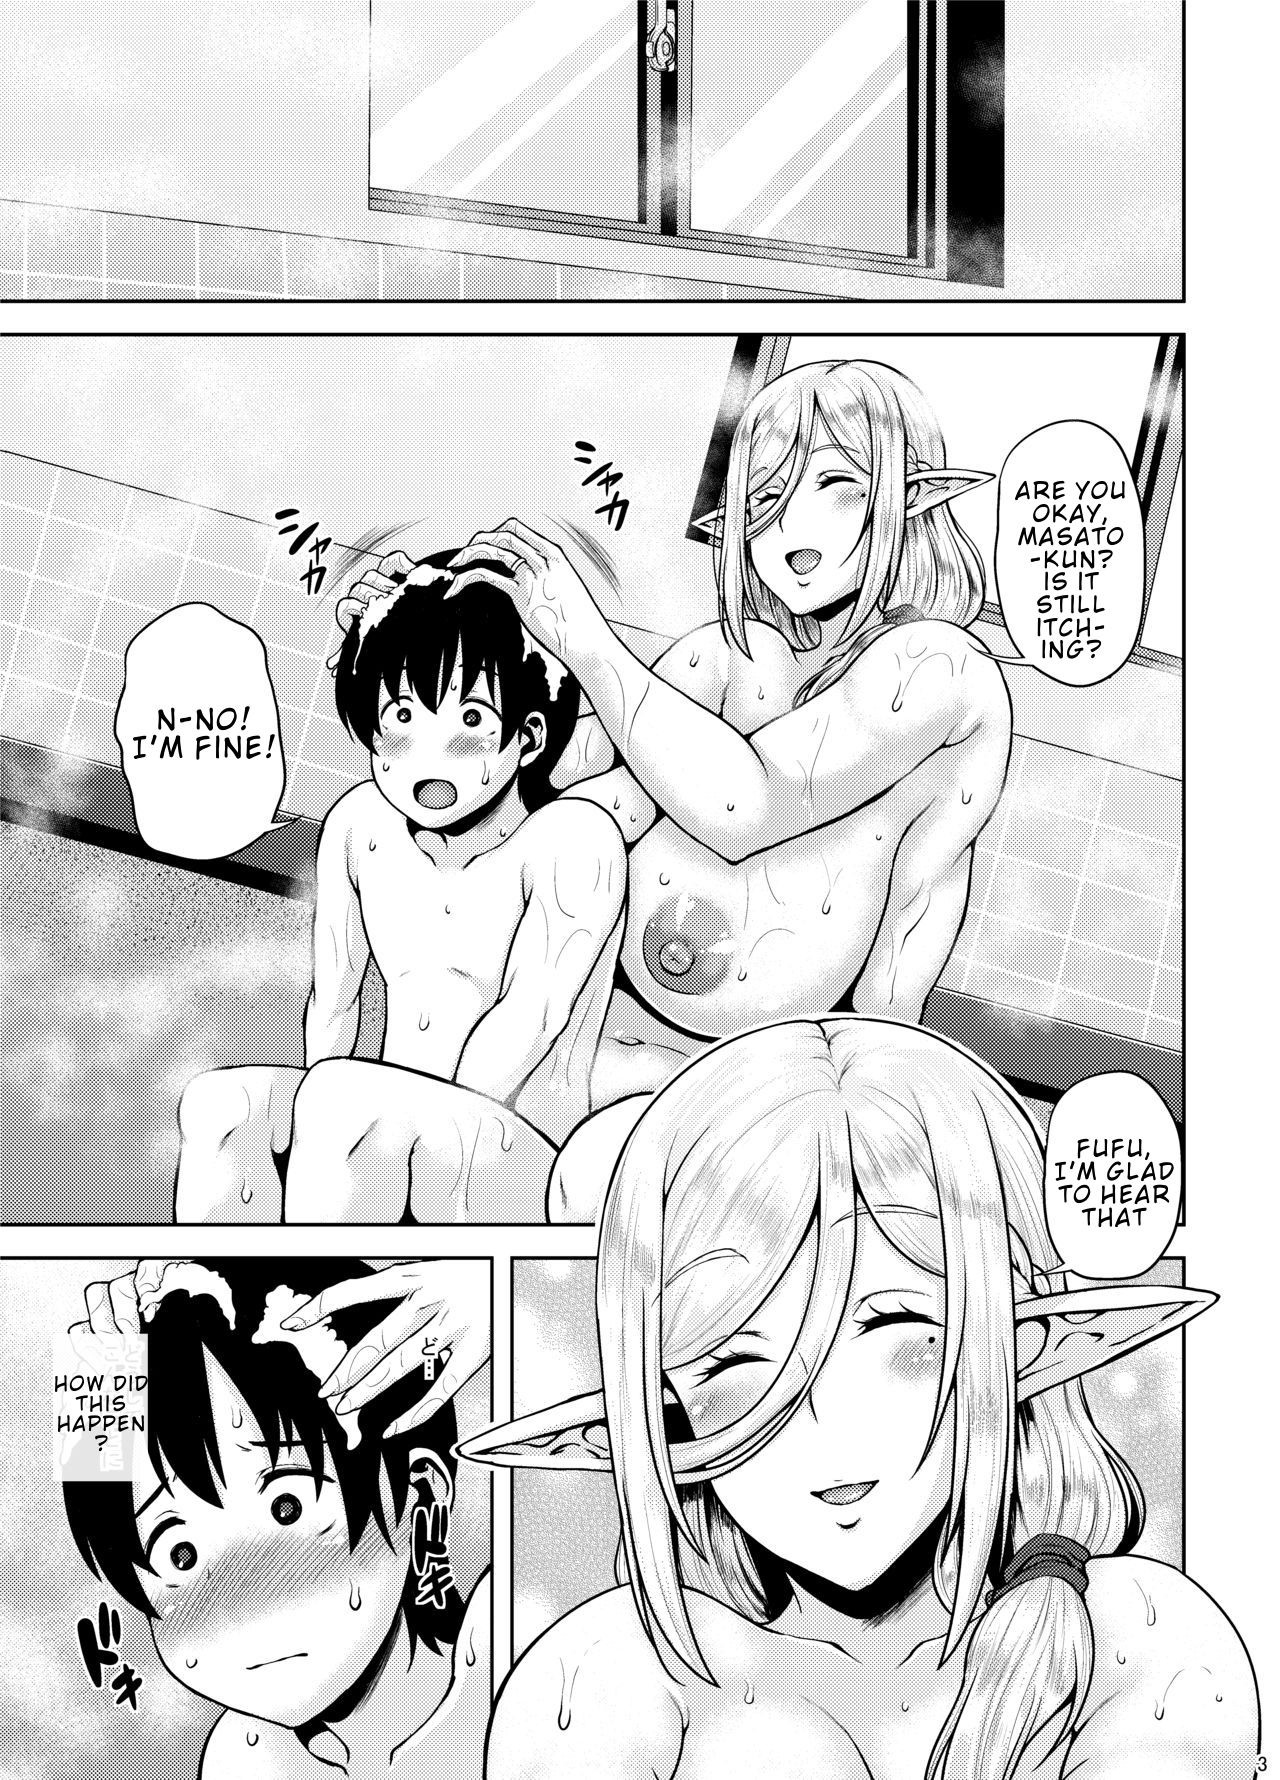 Hentai Manga Comic-A Book About Having Sex With a Widow Elf Manager-Read-2